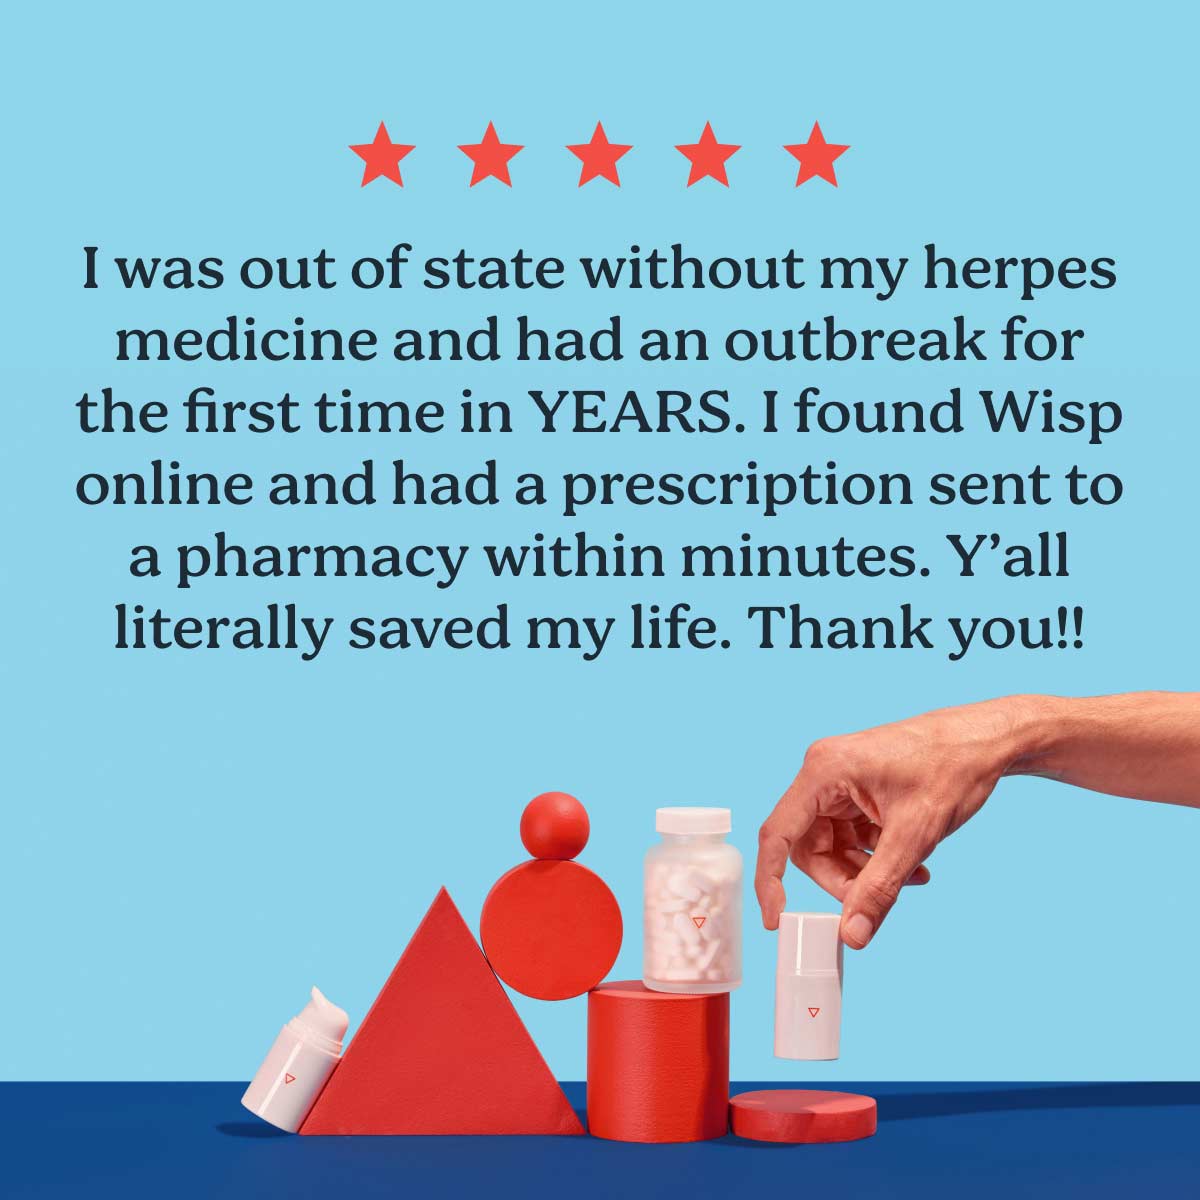 5 star customer review for herpes treatment with colorful product imagery in the background